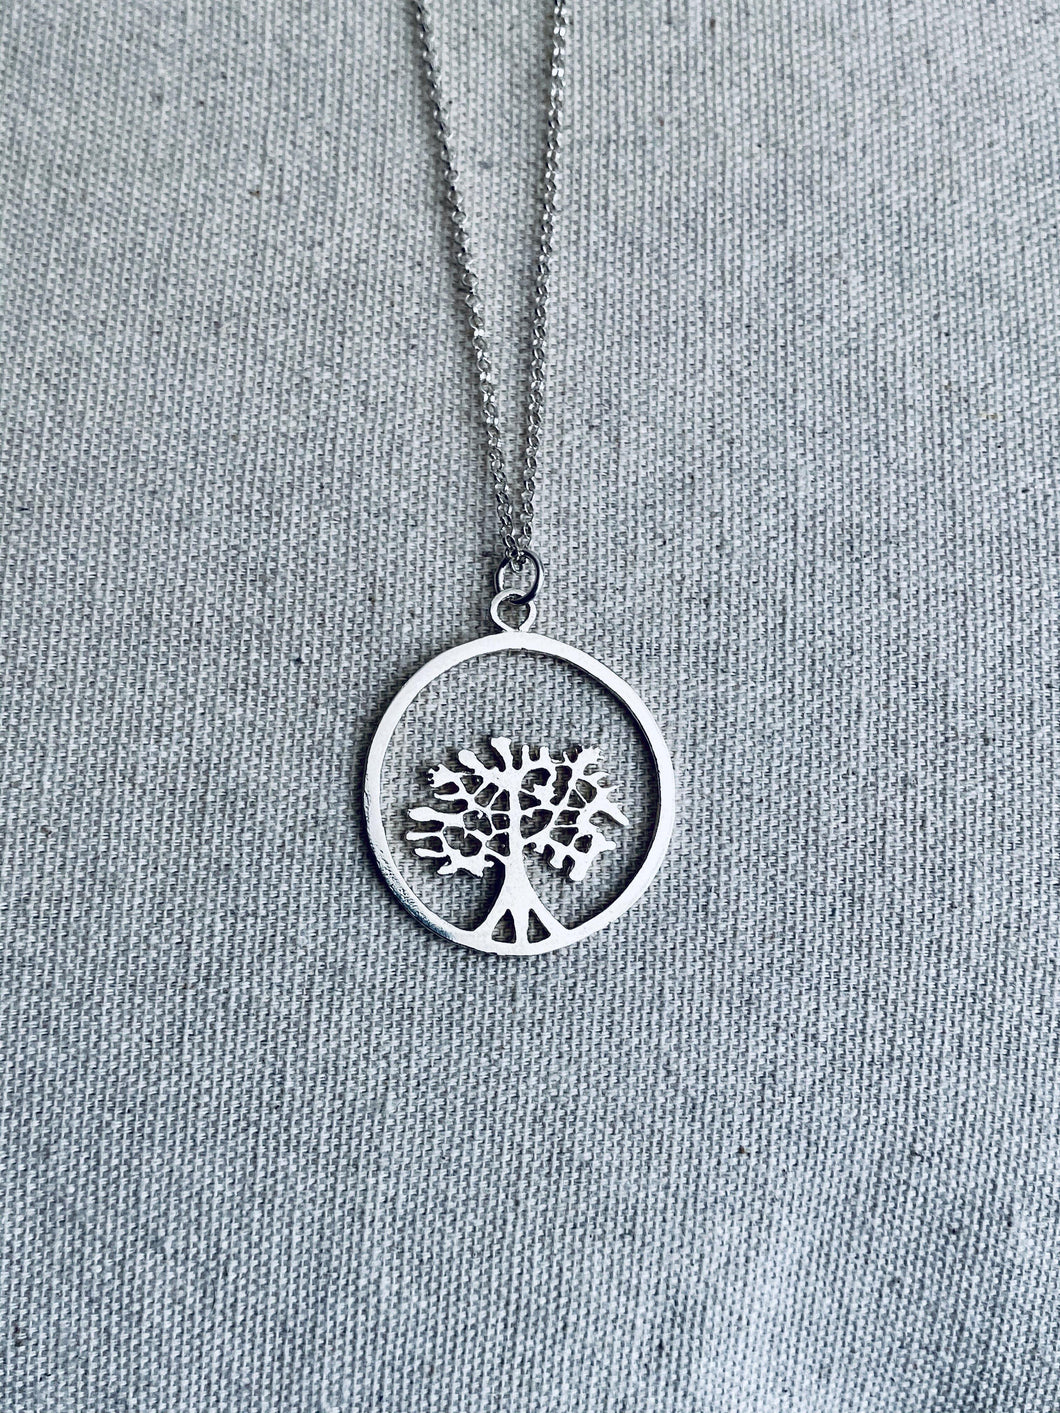 Silver NecklaceTree of Life - Full Moon Designs